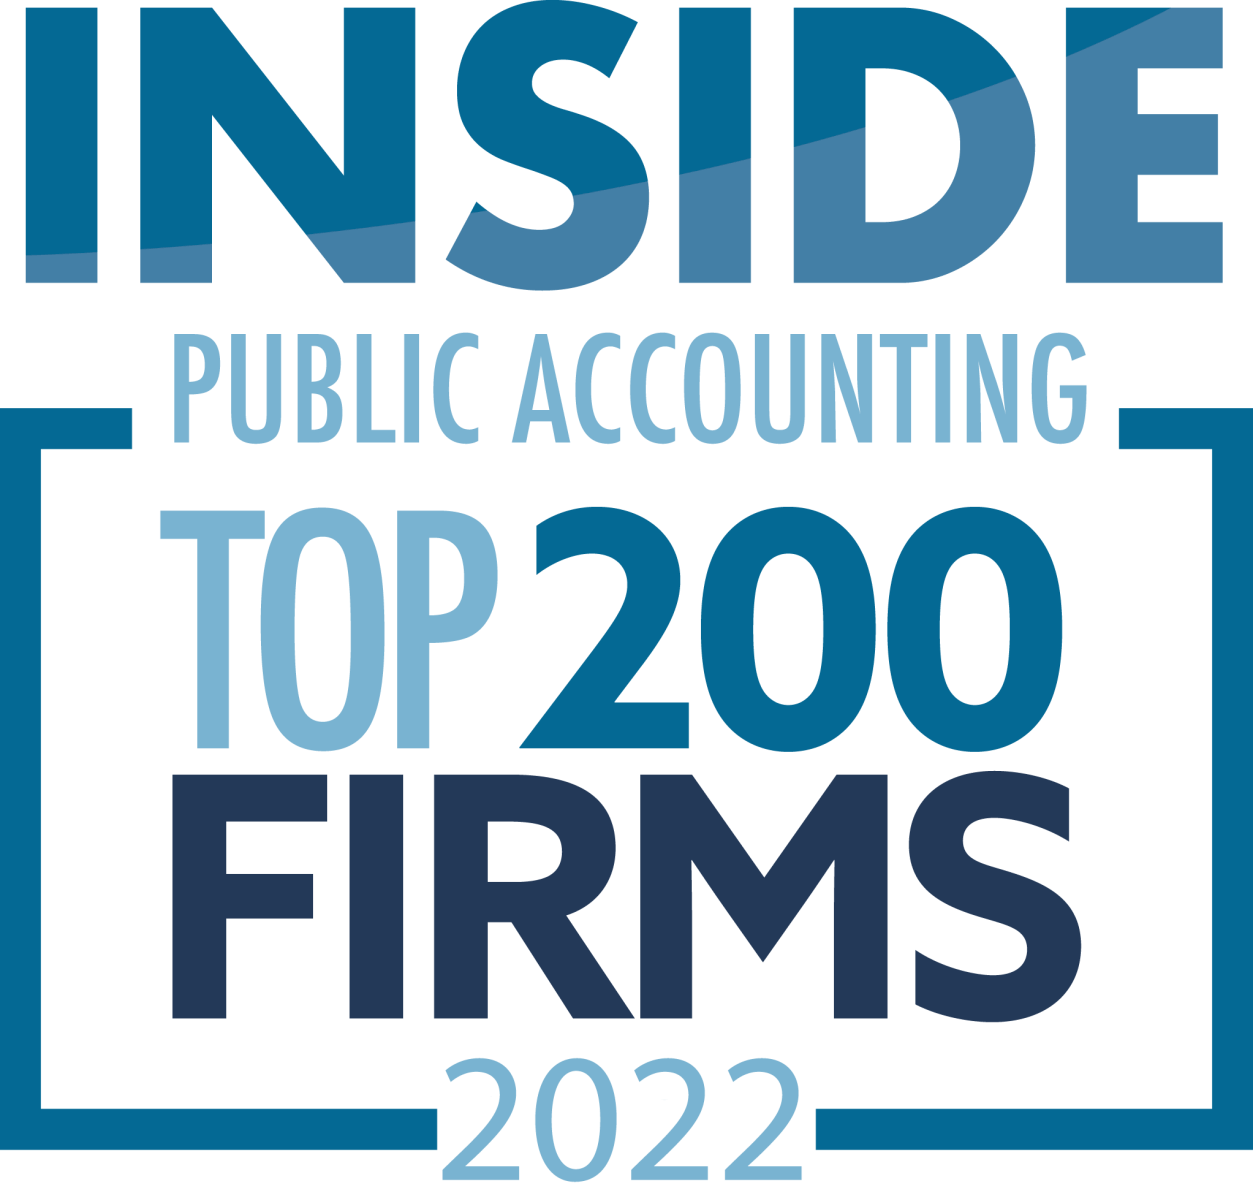 INSIDE Public Accounting recognition / accolade